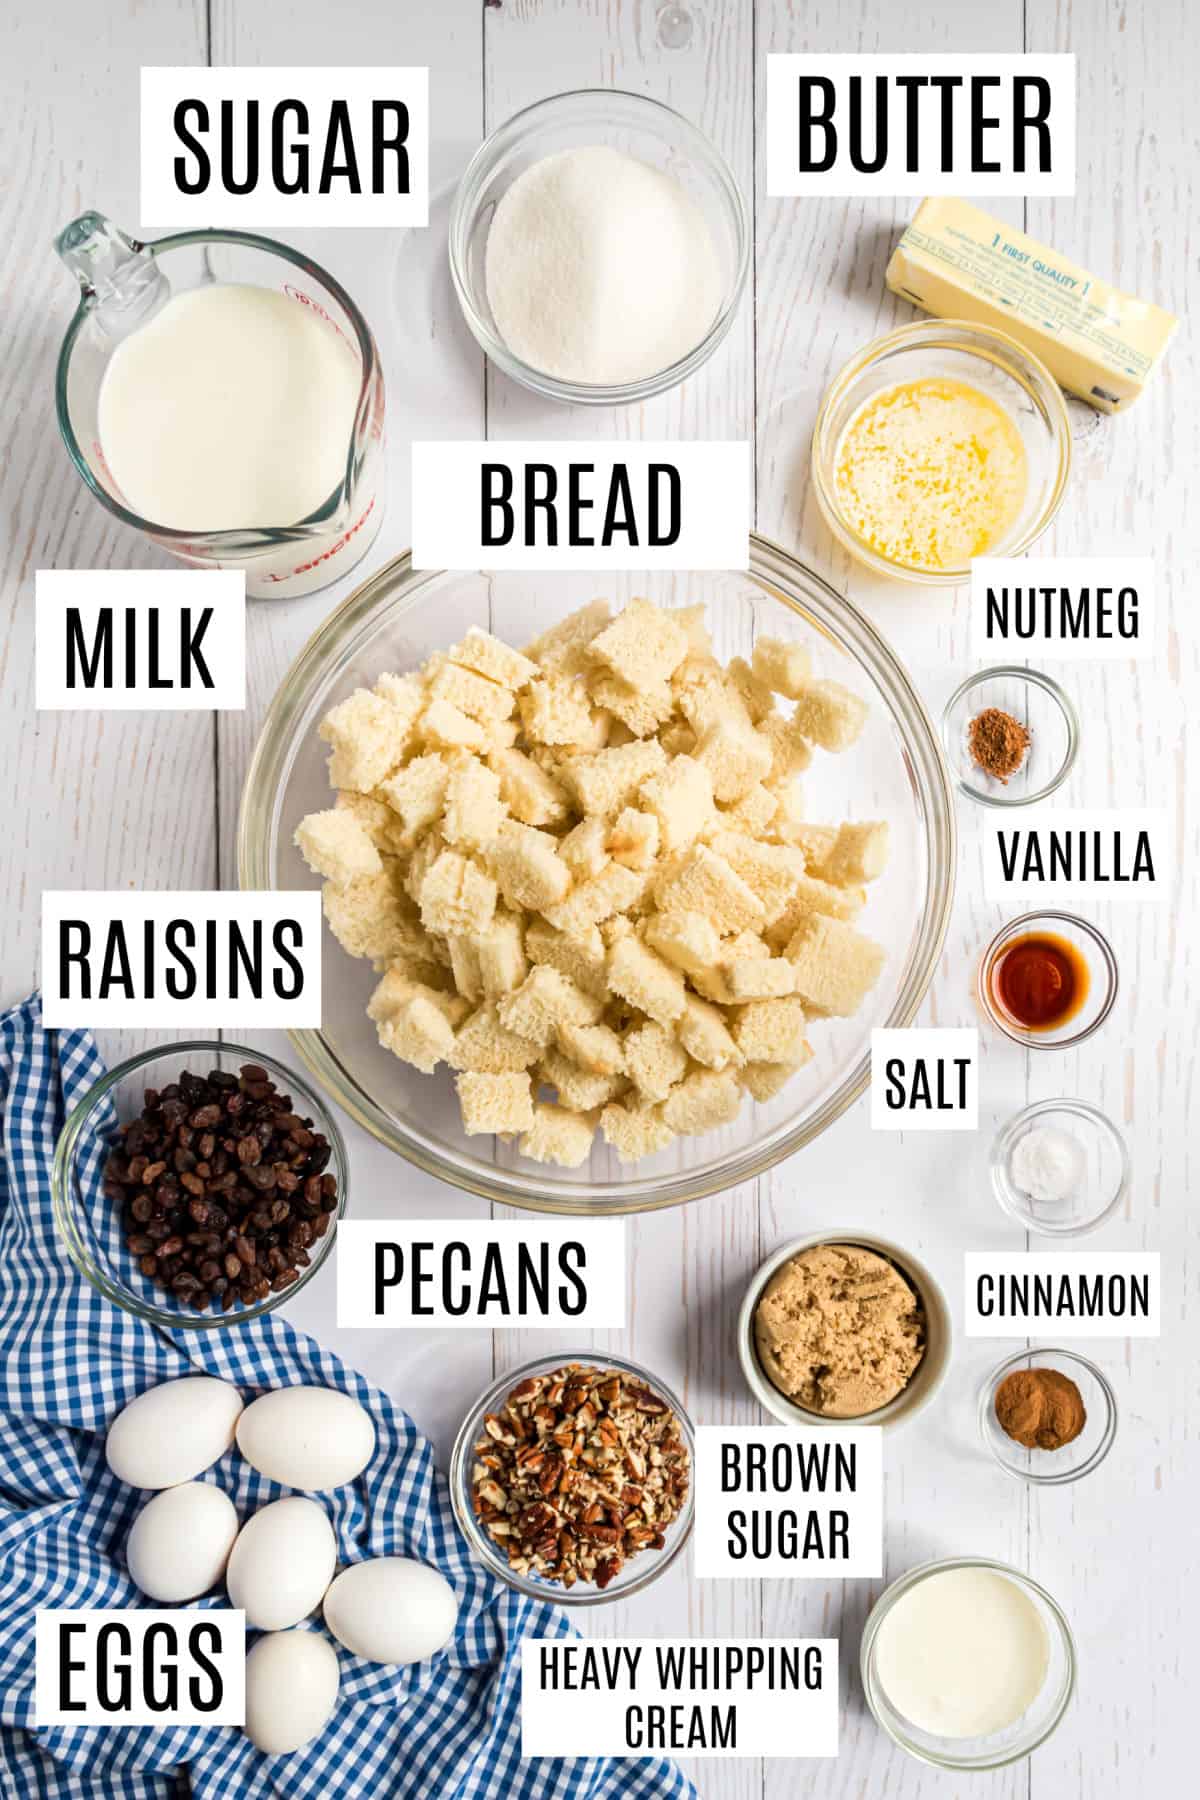 Ingredients needed to make caramel topped bread pudding.